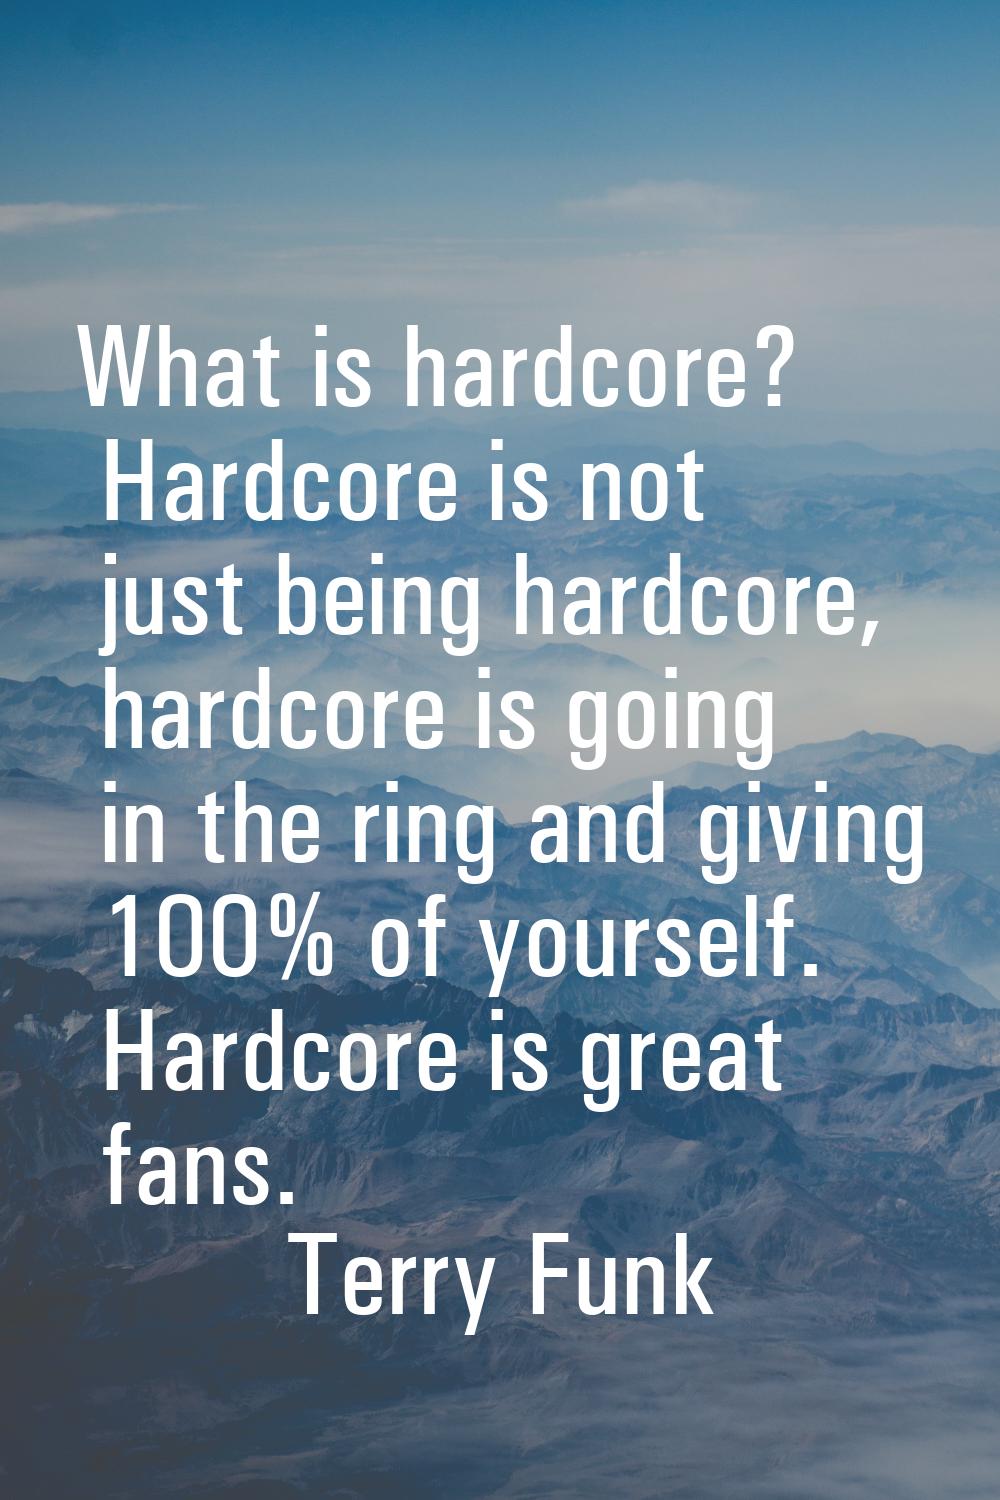 What is hardcore? Hardcore is not just being hardcore, hardcore is going in the ring and giving 100